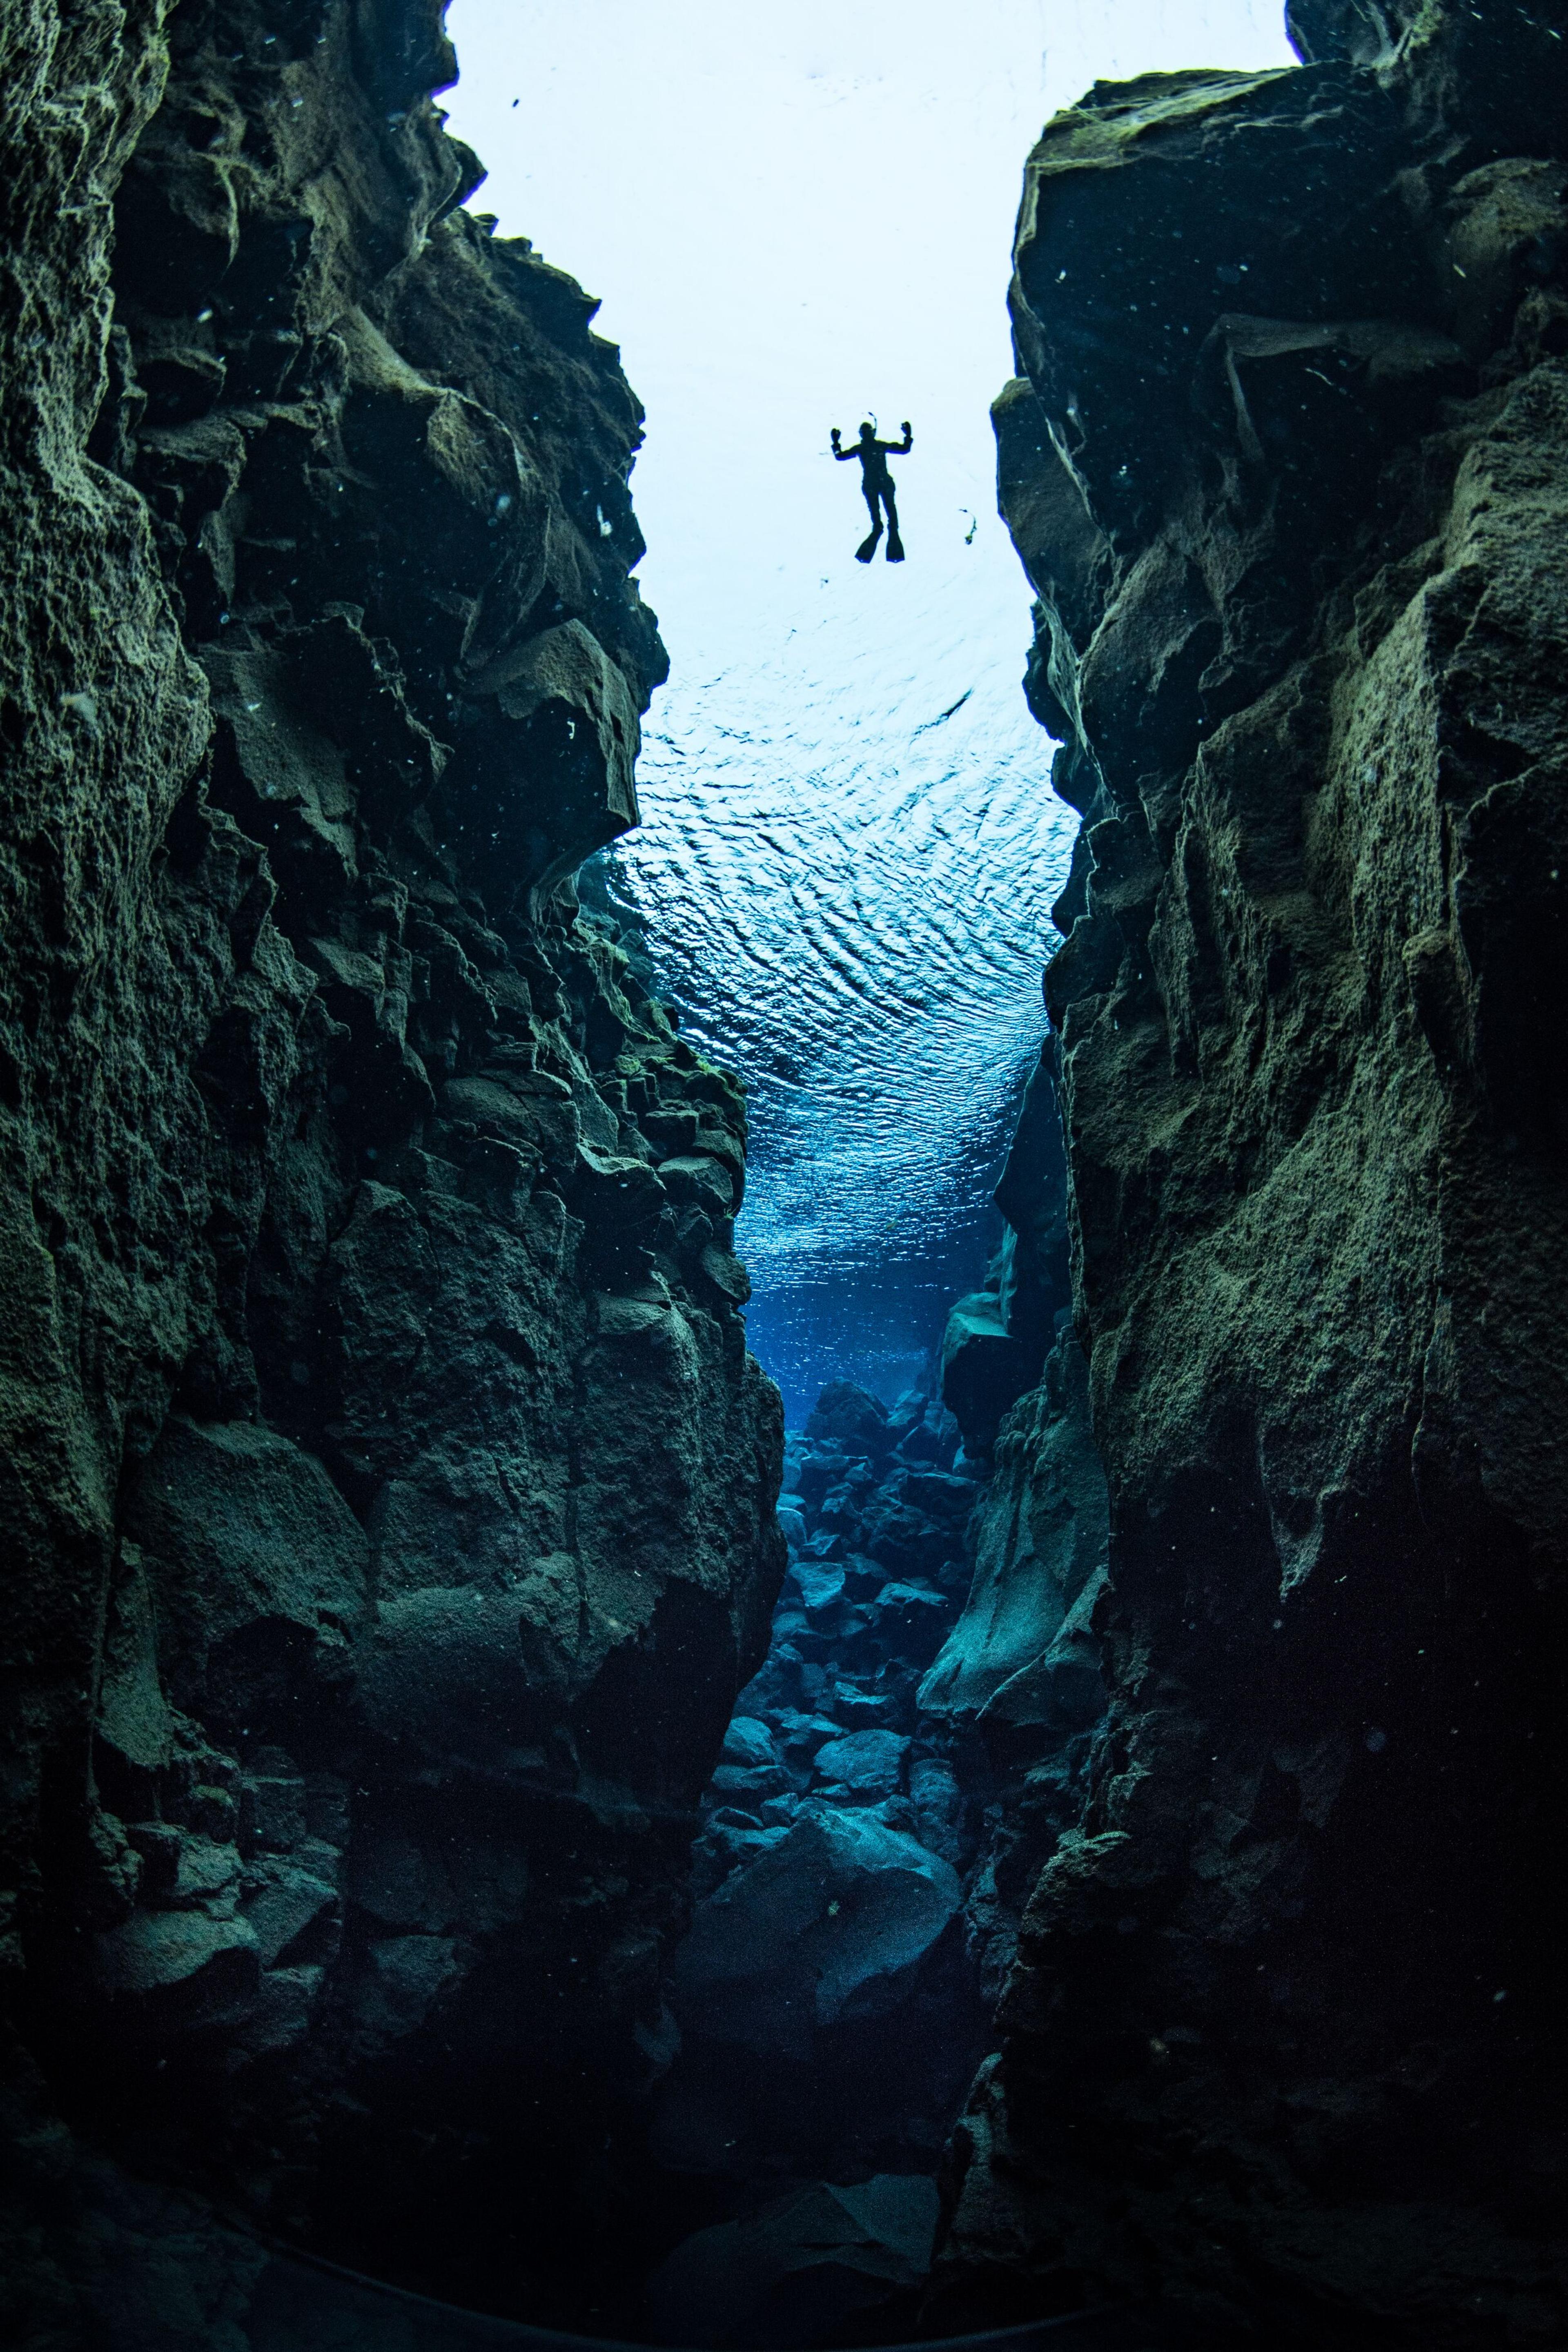 A silhouette of a diver suspended in the clarity of the water, between the narrow walls of a rock fissure, with light penetrating from the surface, highlighting the serene and majestic underwater environment of Silfra.